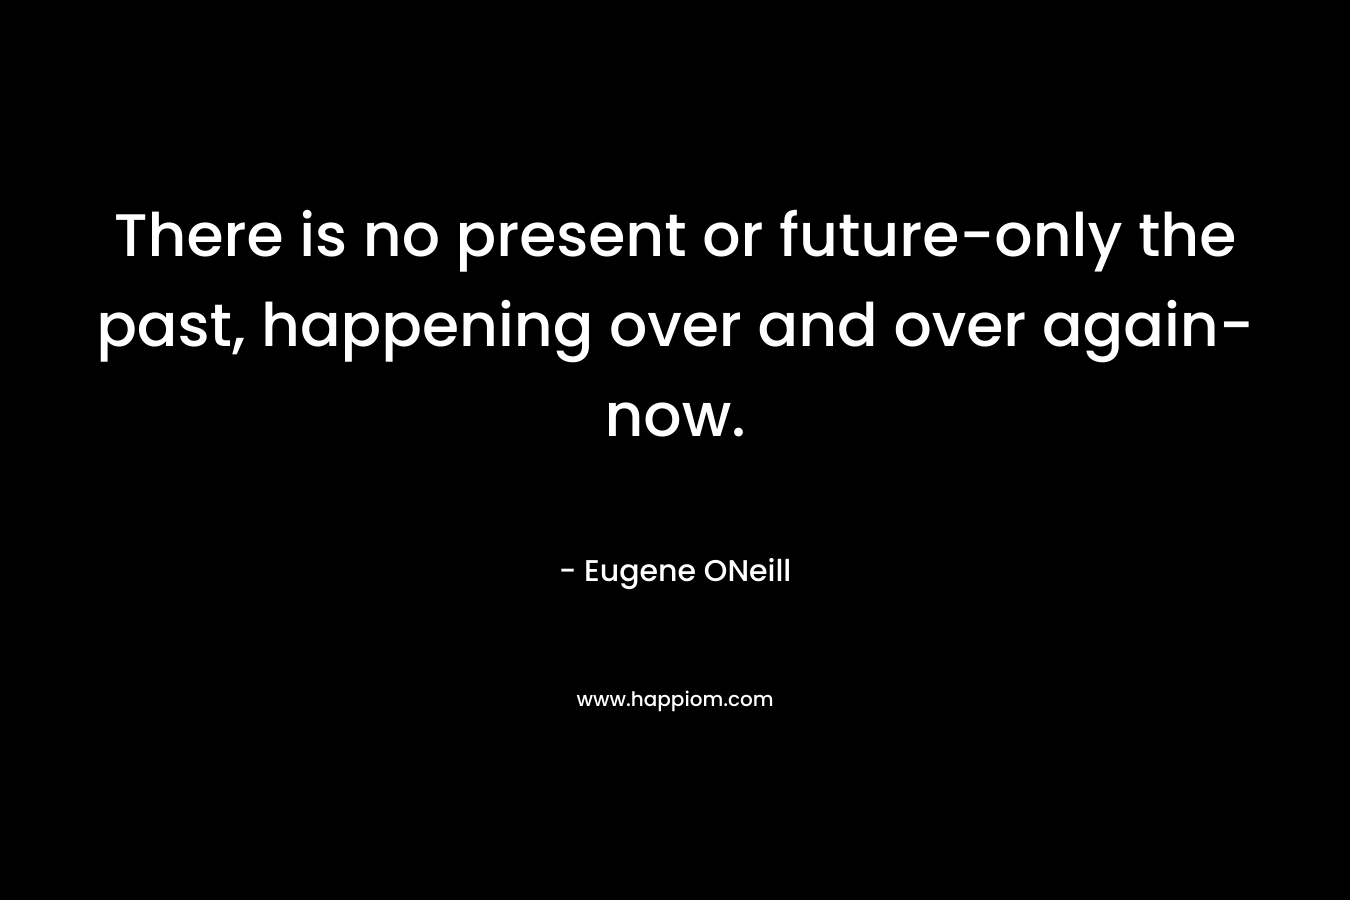 There is no present or future-only the past, happening over and over again-now.